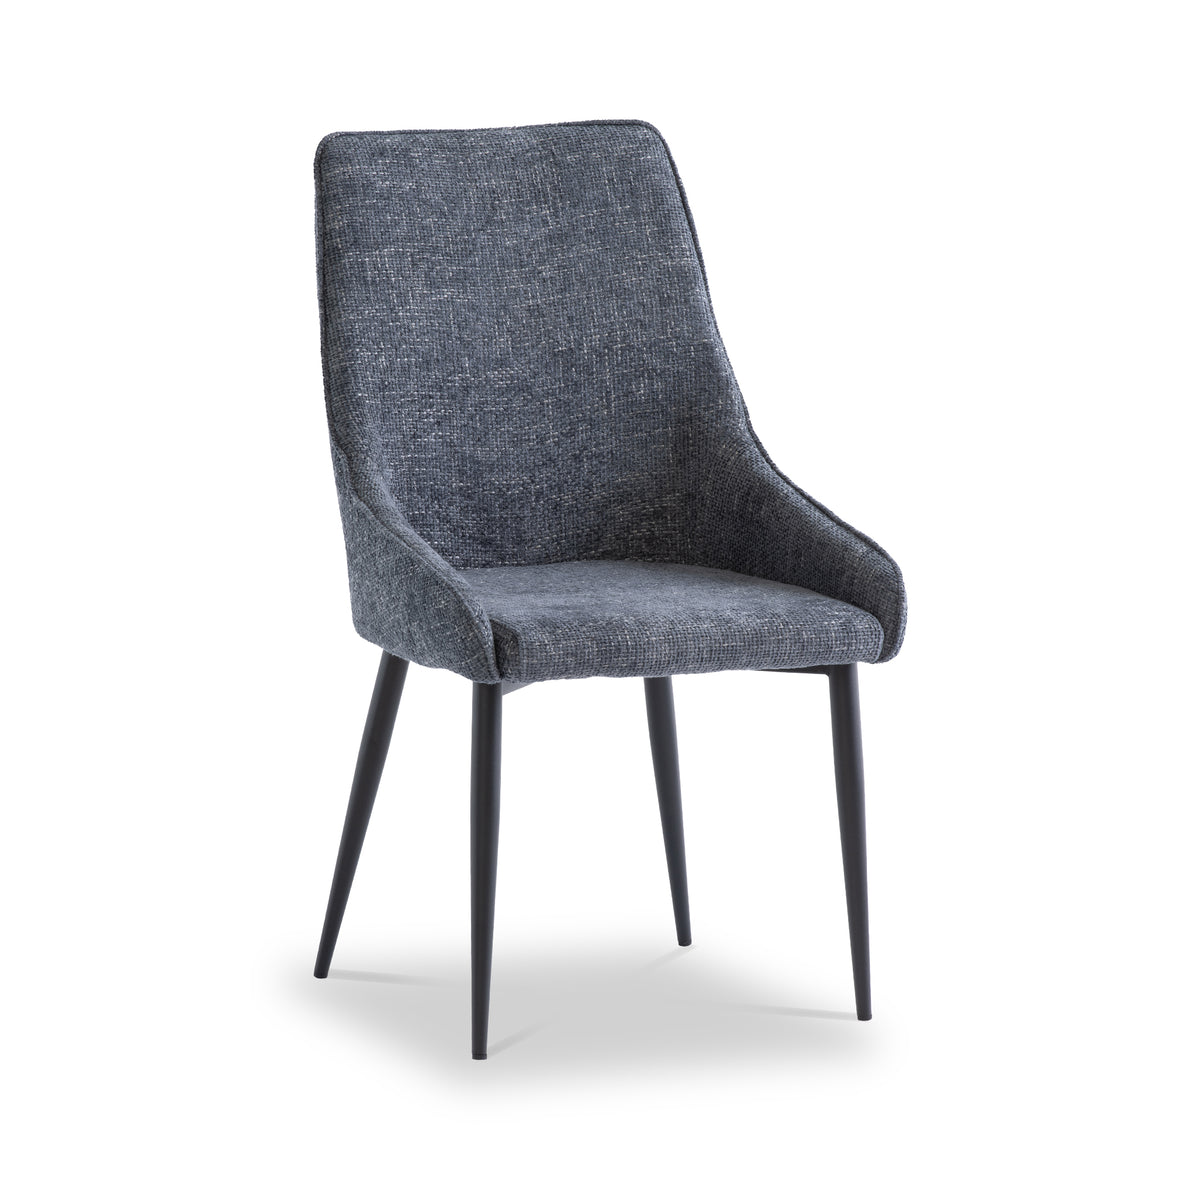 Perth Blue Dining Chair by Roseland Furniture